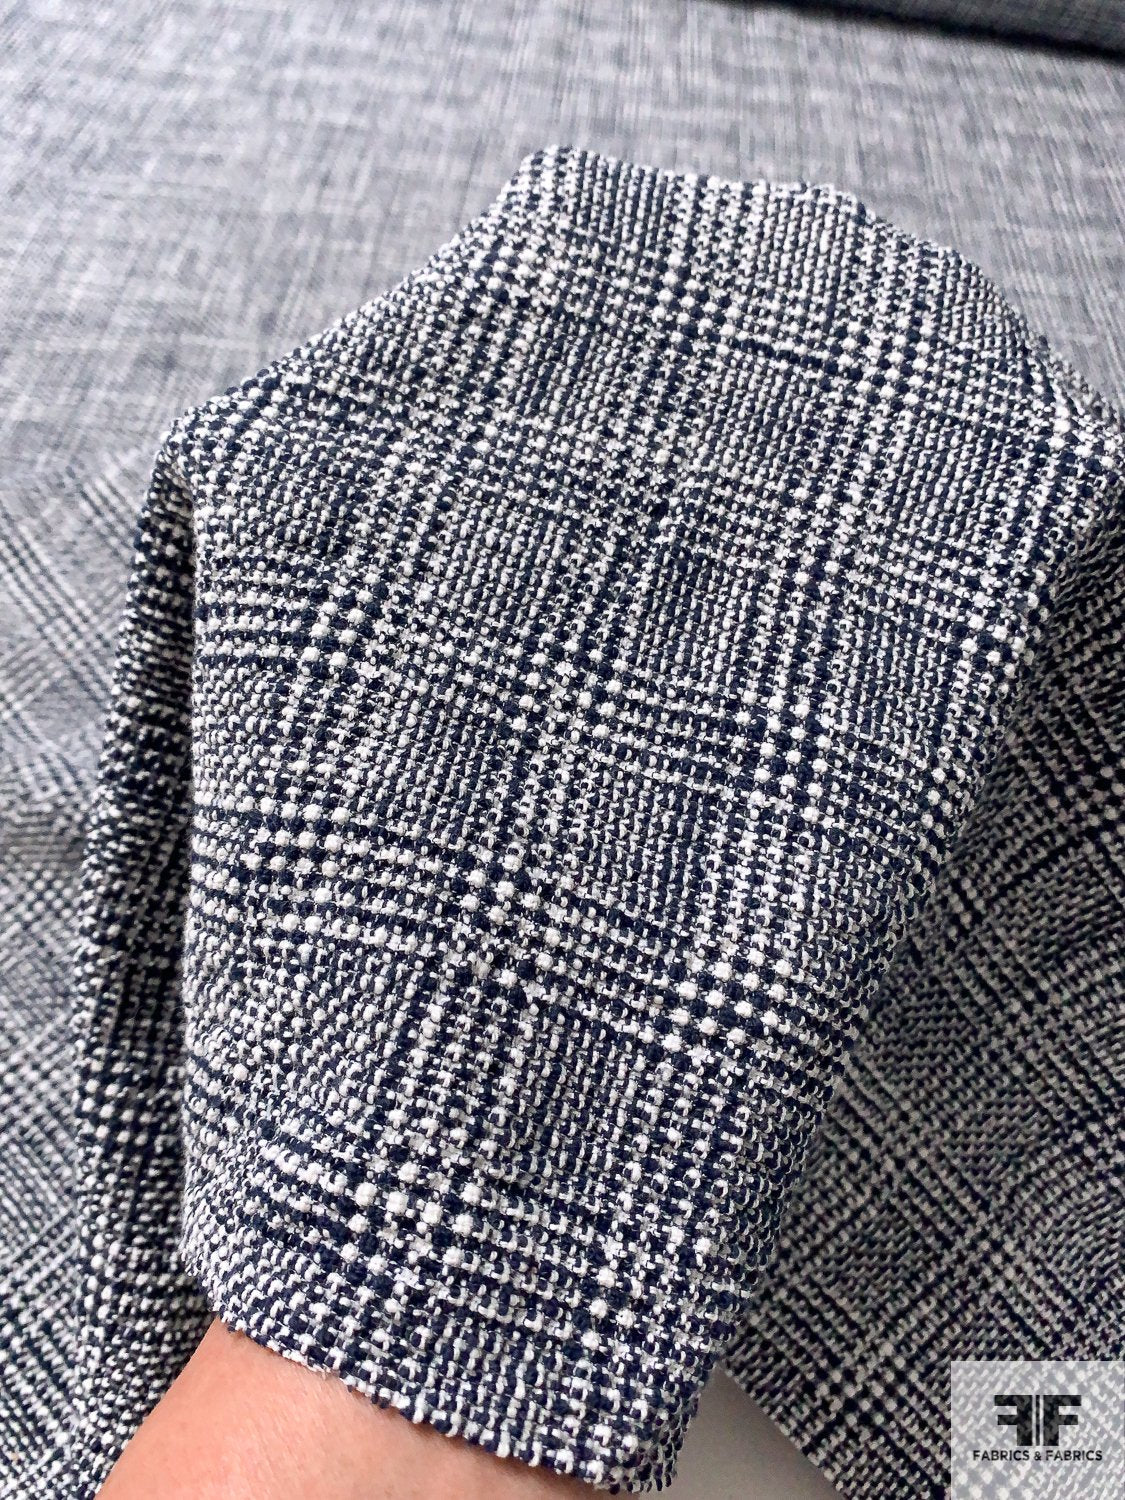 Italian Glen Plaid Textured Stretch Suiting - Navy / White